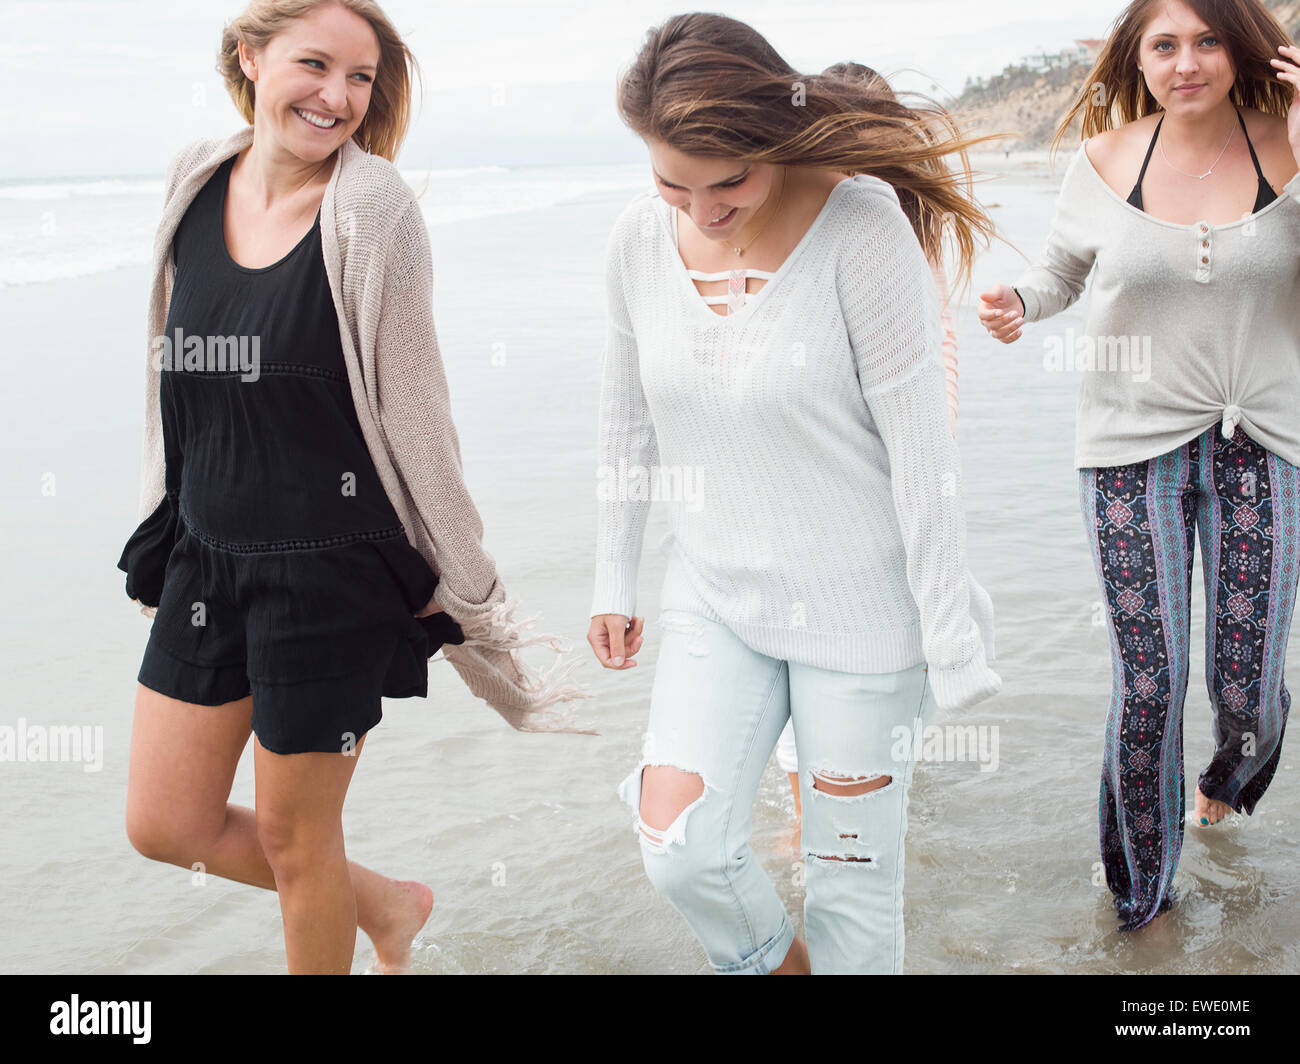 Three smiling young women walking on a beach Stock Photo